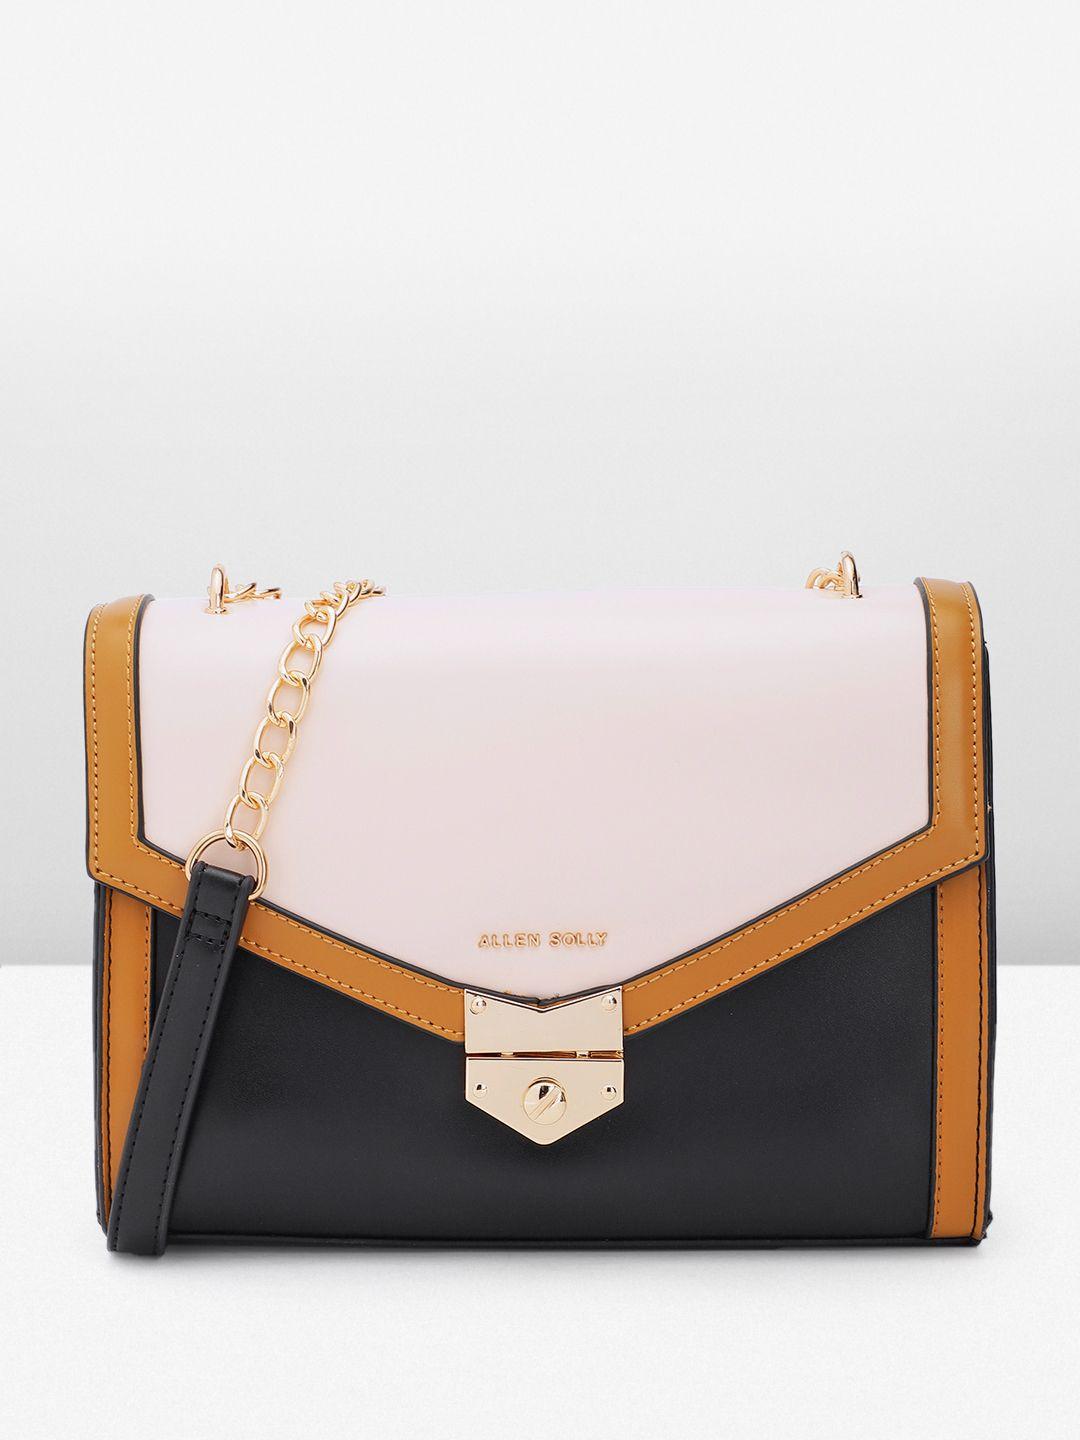 allen solly colourblocked structured sling bag